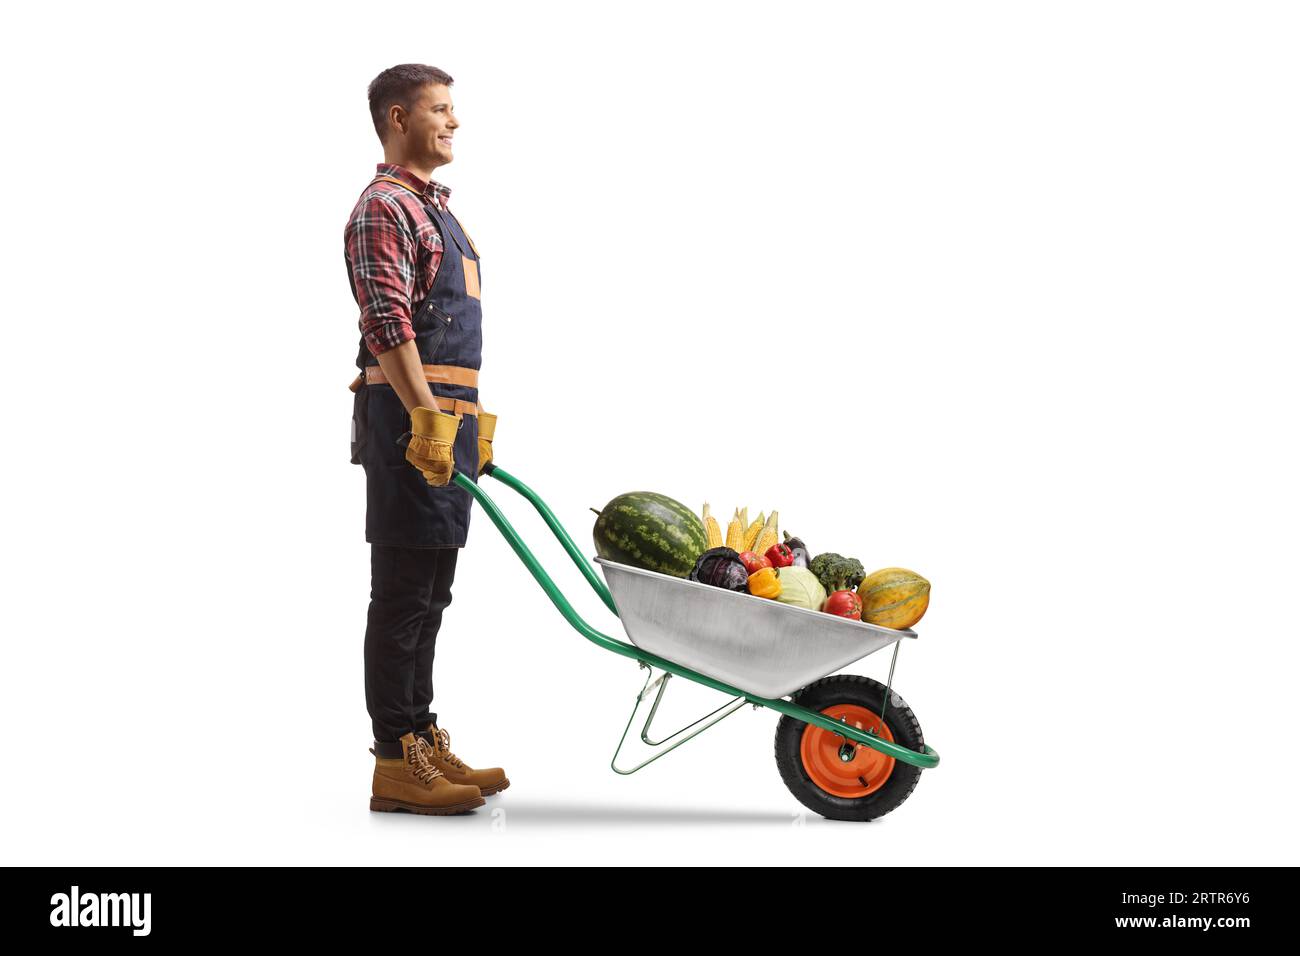 Full length profile shot of a gardener standing with a wheelbarrow full of fruits and vegetables isolated on white background Stock Photo